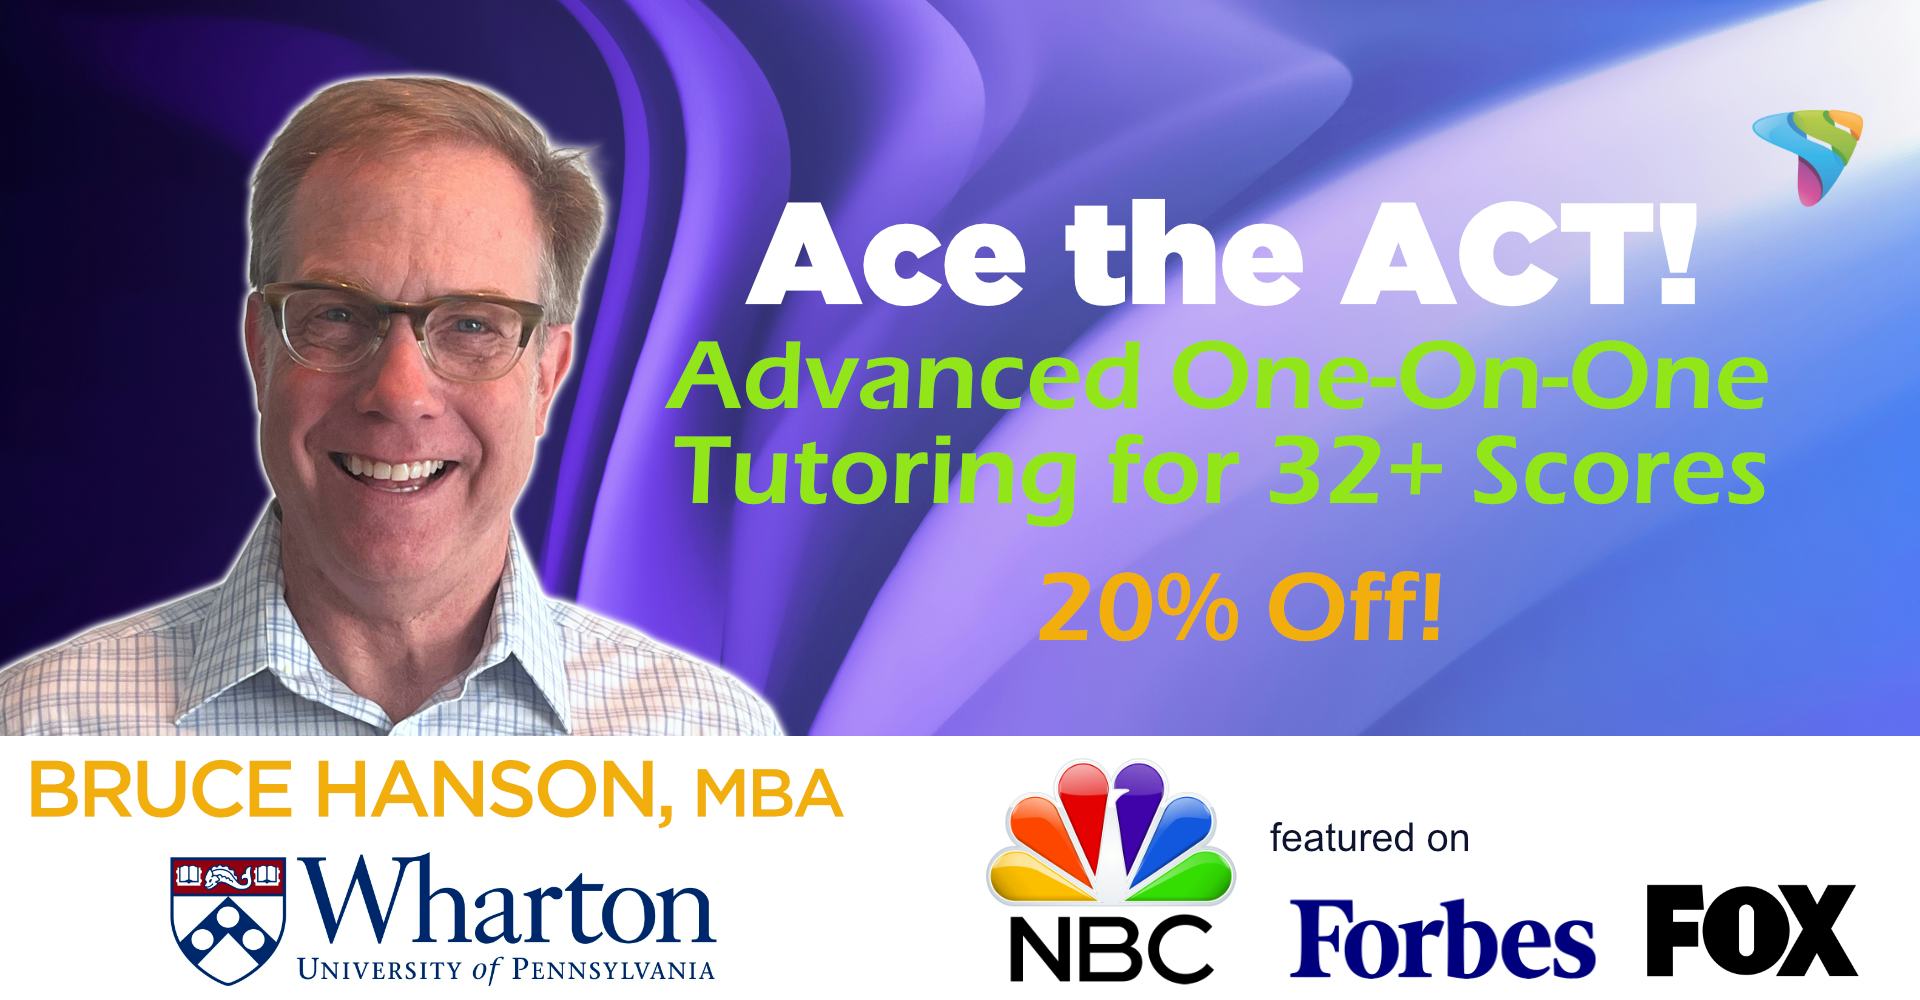 ACE the ACT:  Advanced Tutoring for 32+ Scores (20% Off)